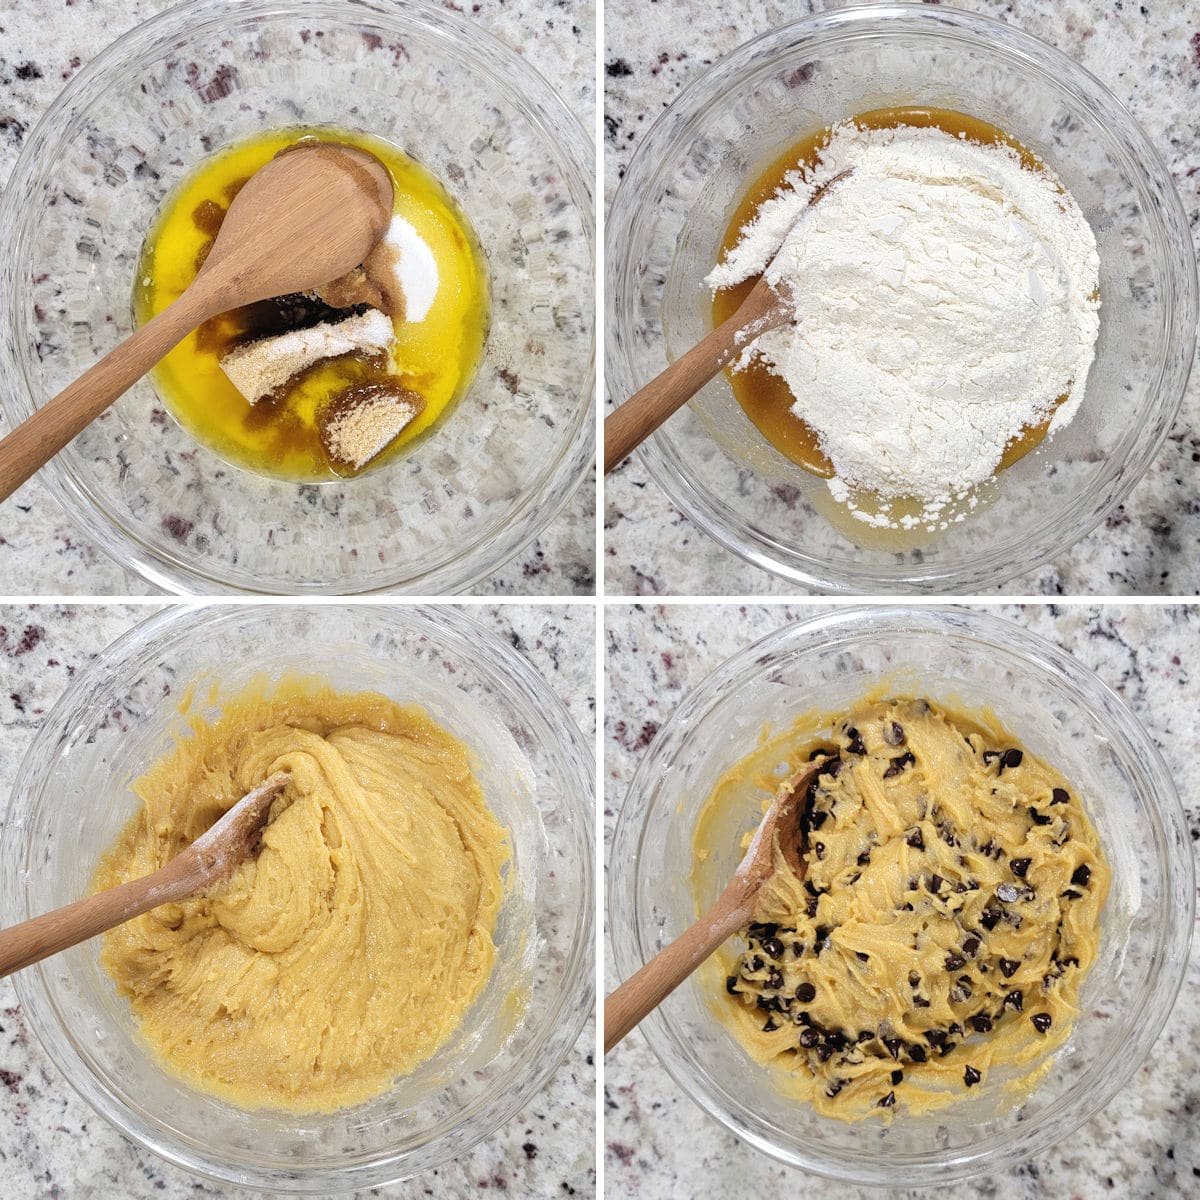 A collage showing ingredients being mixed into a cookie batter.